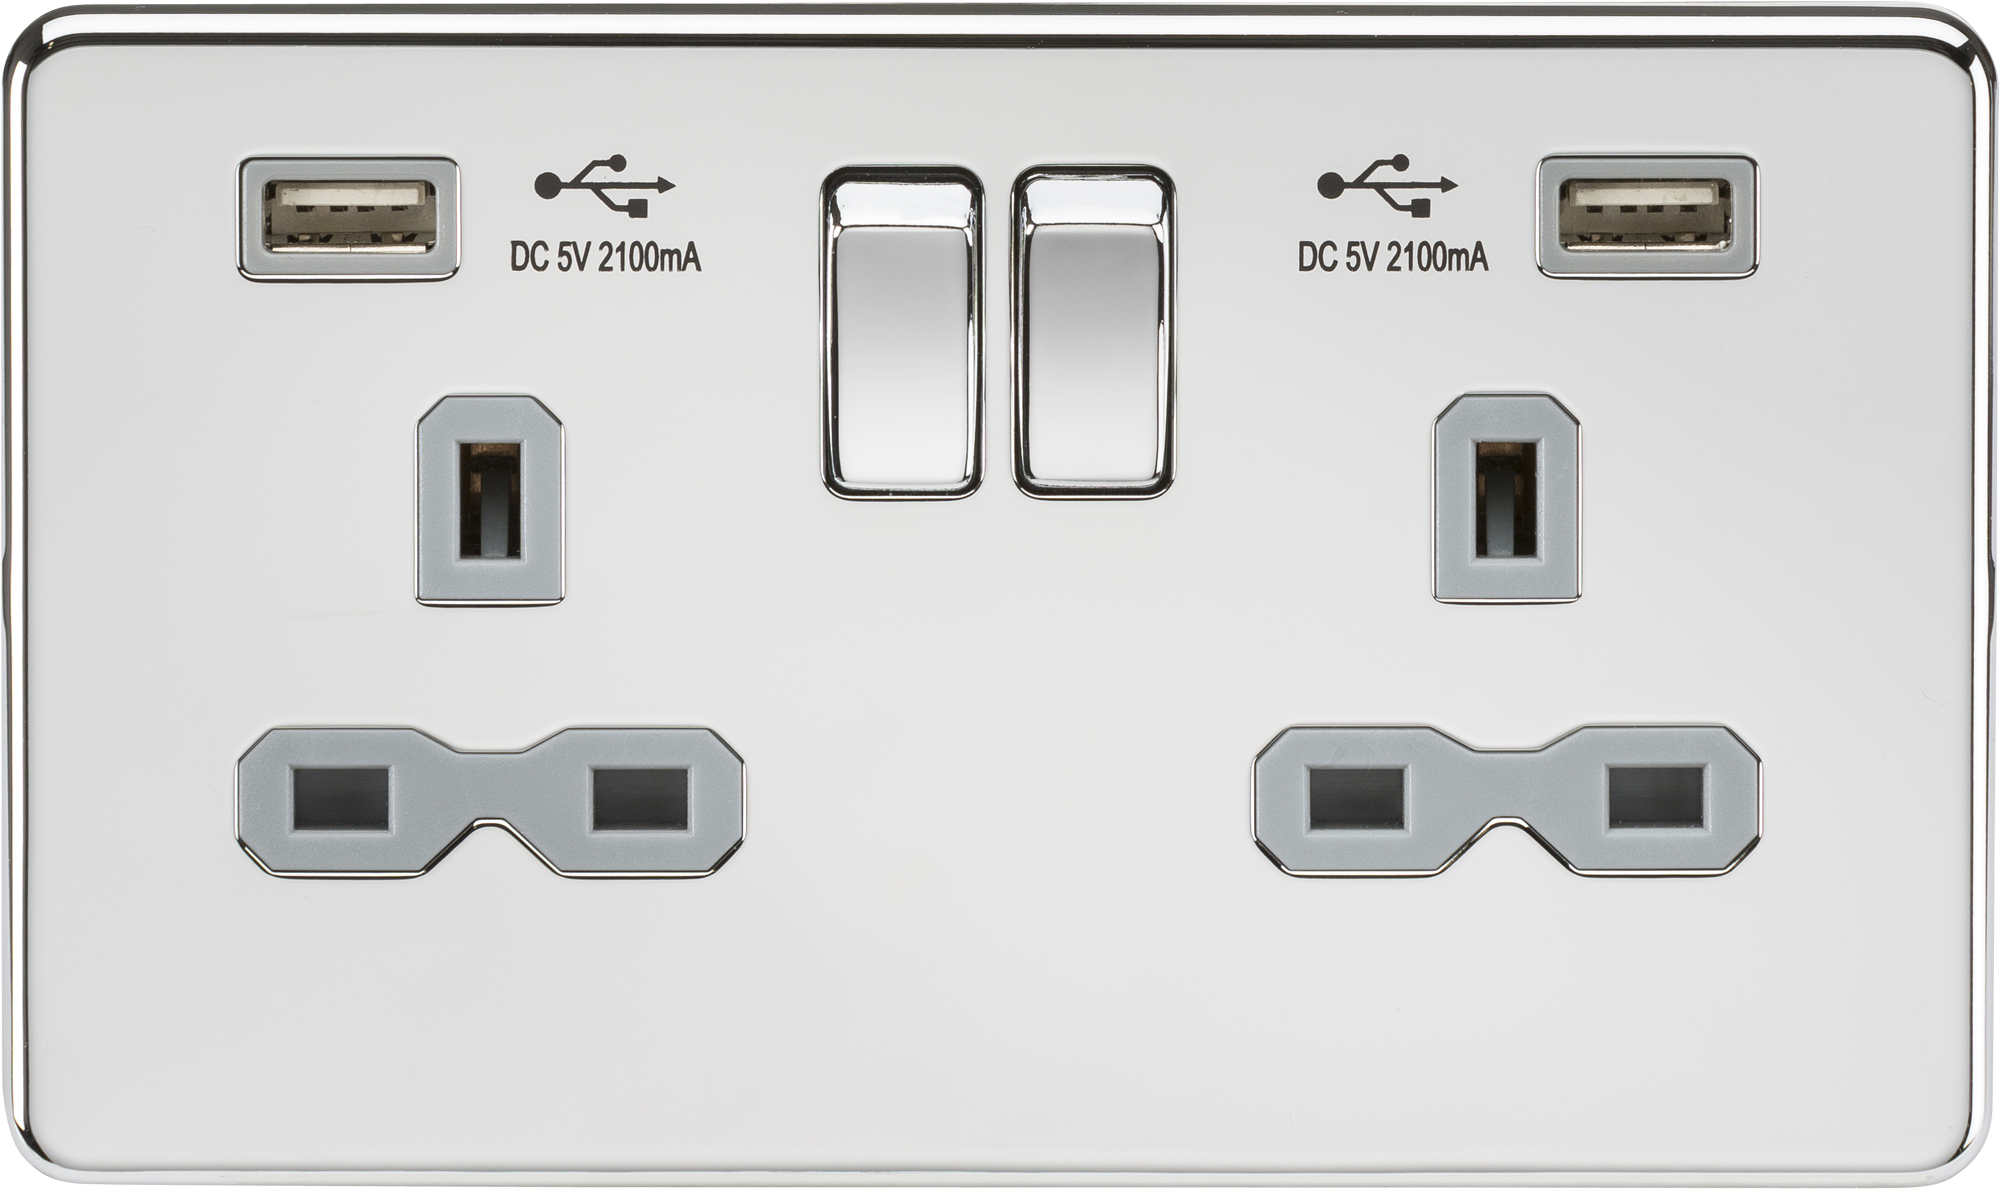 Screwless 13A 2G Switched Socket With Dual USB Charger (2.1A) - Polished Chrome With Grey Insert - SFR9902PCG 